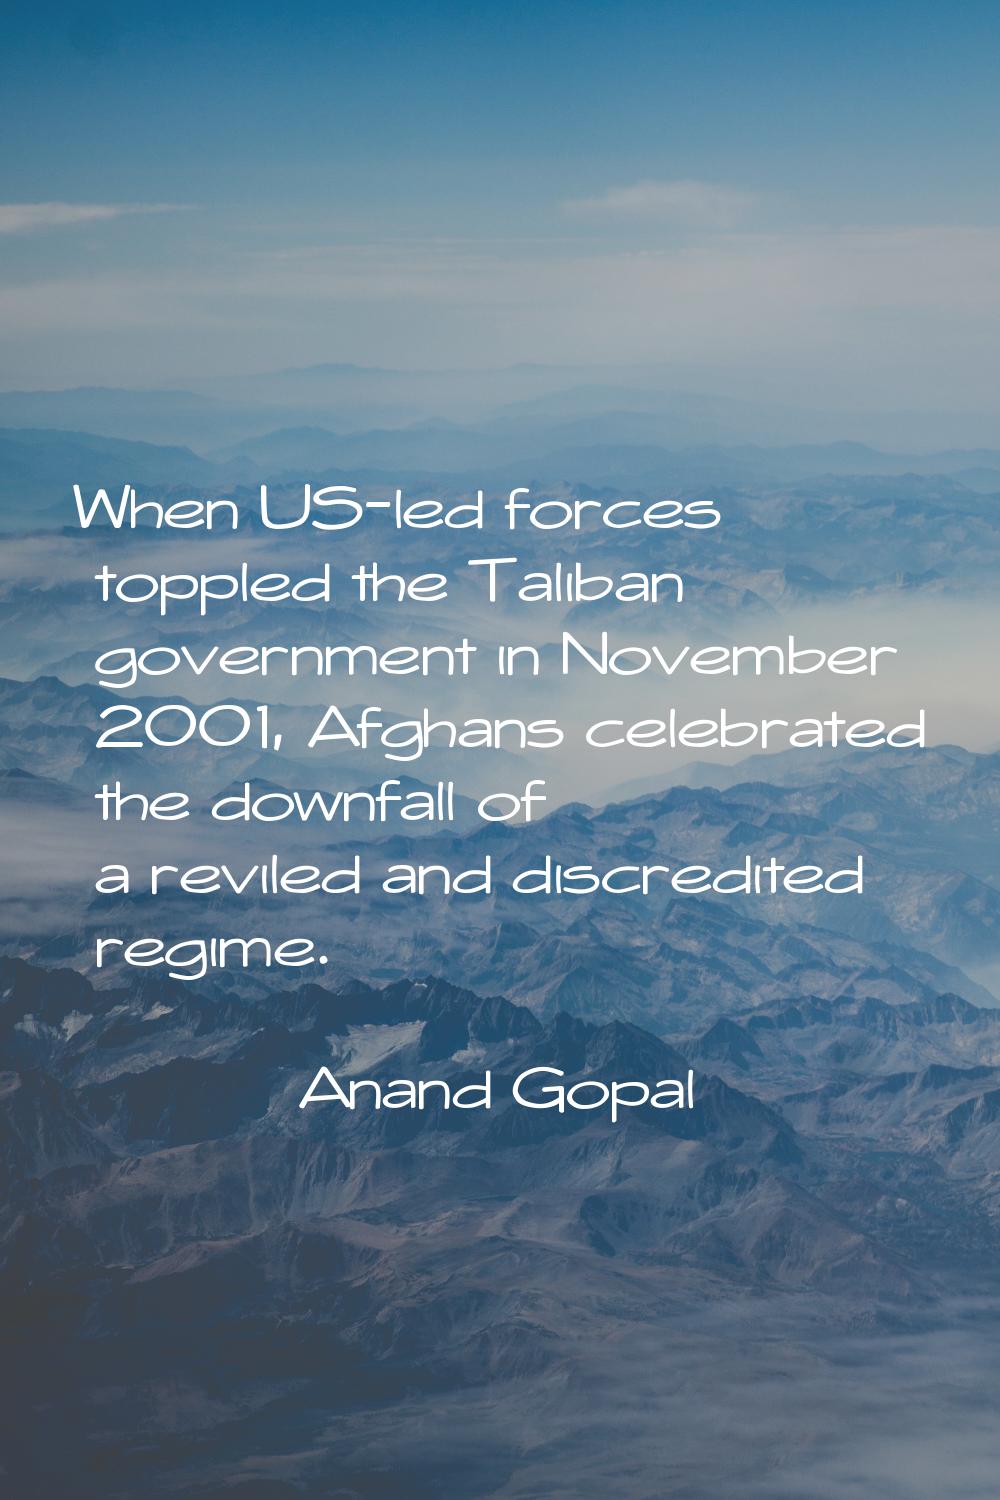 When US-led forces toppled the Taliban government in November 2001, Afghans celebrated the downfall